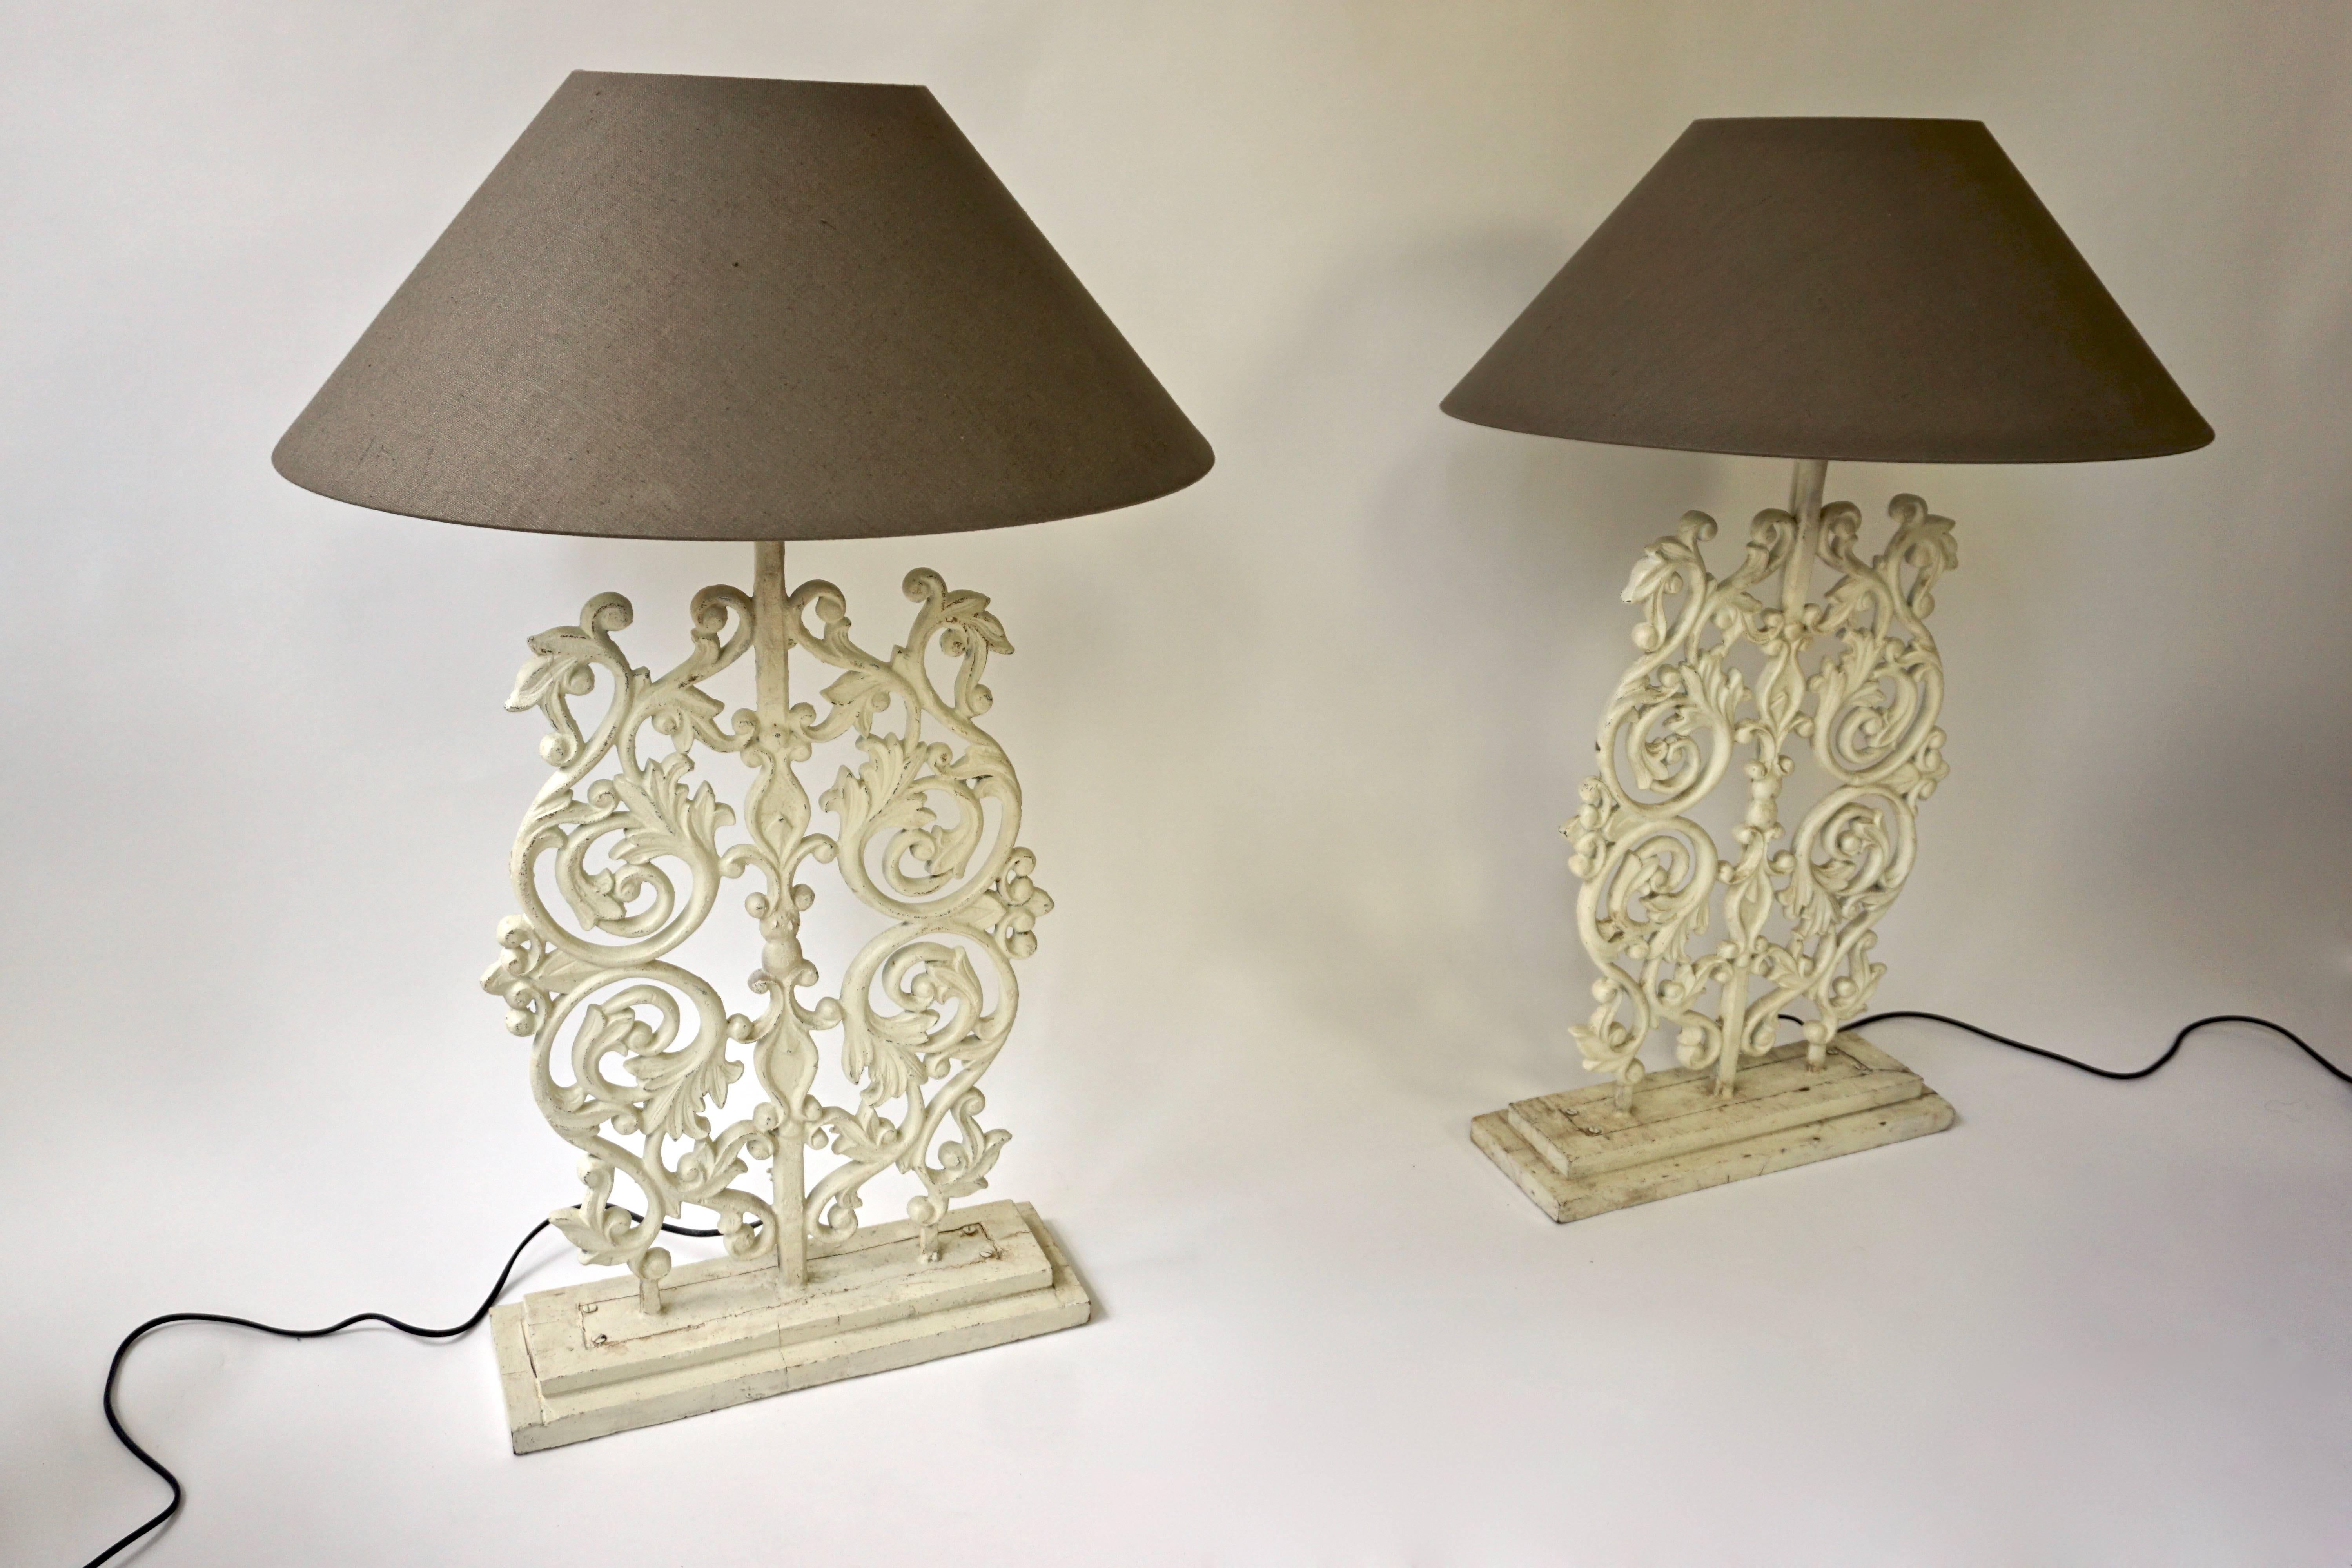 Two white painted iron table or floor lamps.
Measure: Height of the table lamp base without fitting 60 cm.
Height of the table lamp base with fitting 70 cm.
Height with hood 86 cm.
Diameter shade 55 cm.
The weight of the lamp is 12 kg.

The